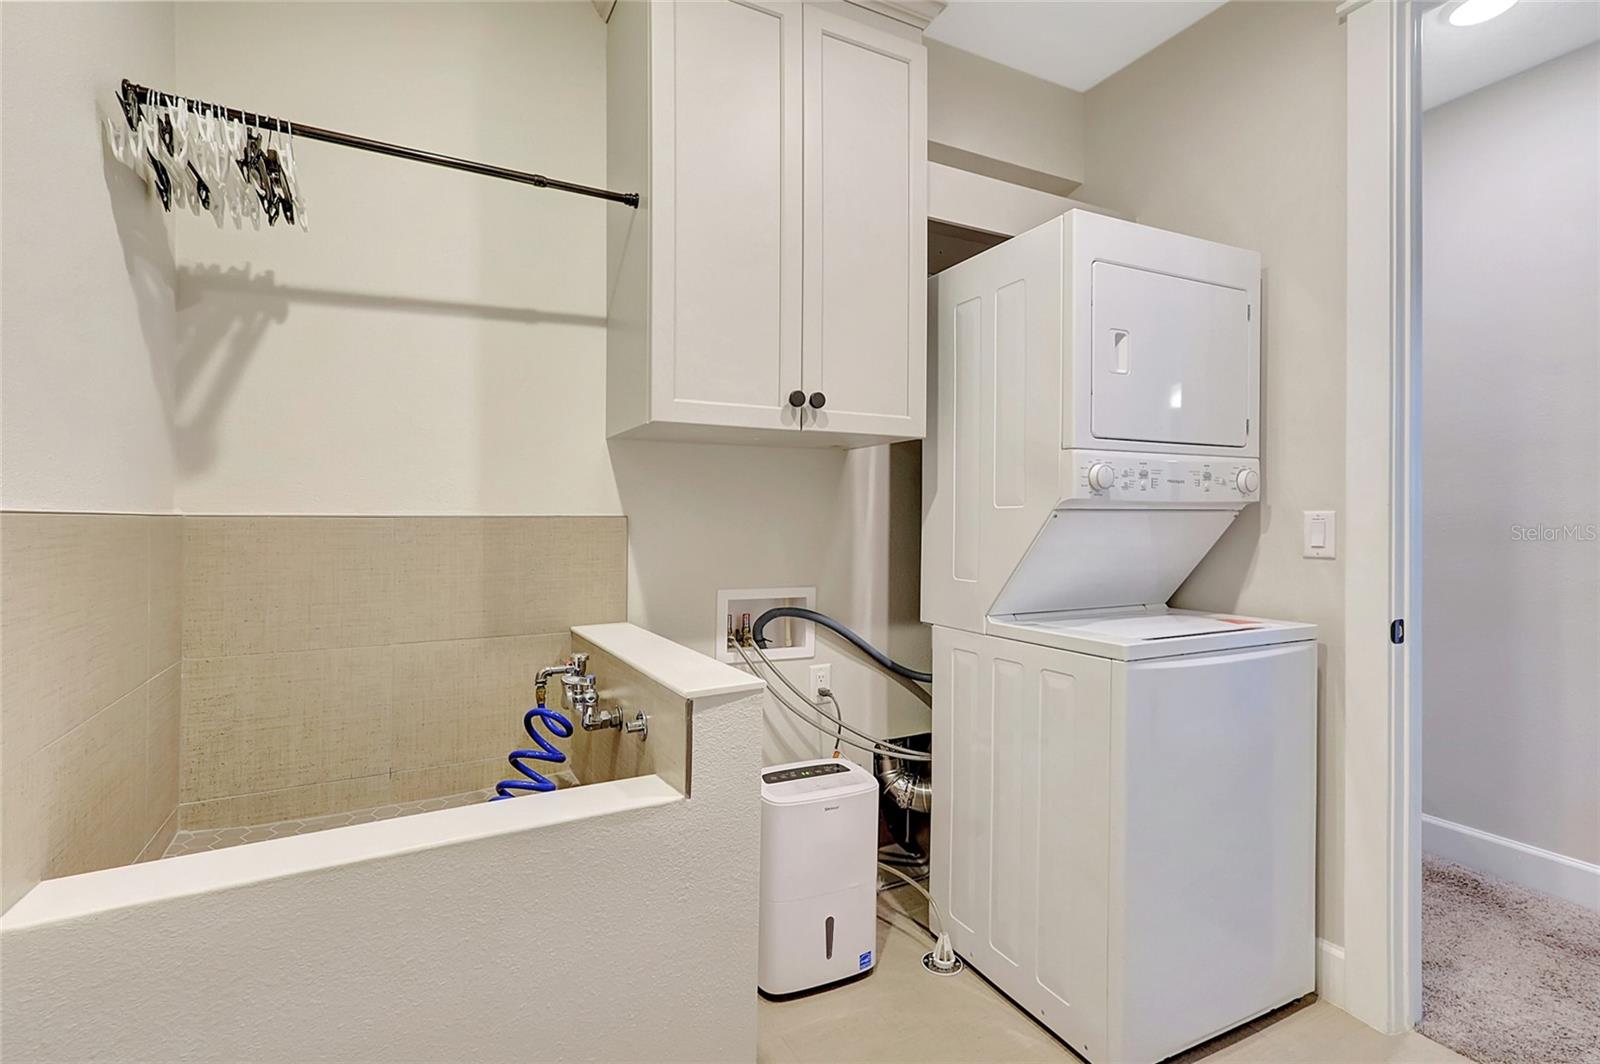 Standard side by side or stack washer dryer and luxurious dog wash,